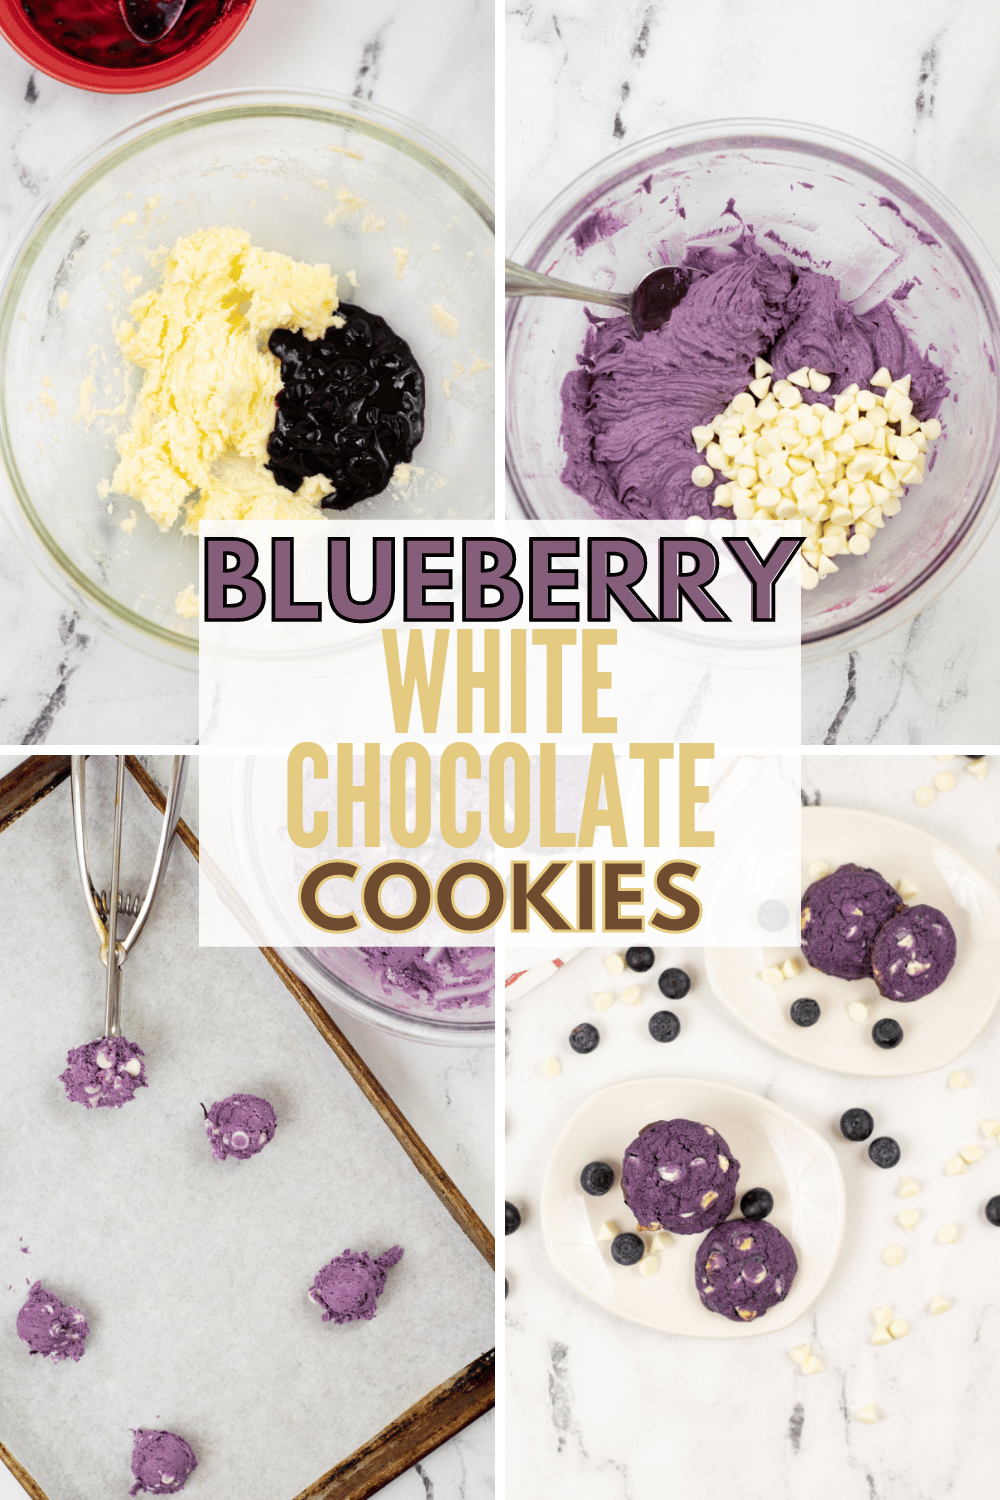 Blueberry White Chocolate Cookies are the perfect summer dessert! These cookies are soft, chewy and full of flavor. #blueberrywhitechocolatecookies #blueberry #whitechocolate #cookies #recipe via @wondermomwannab